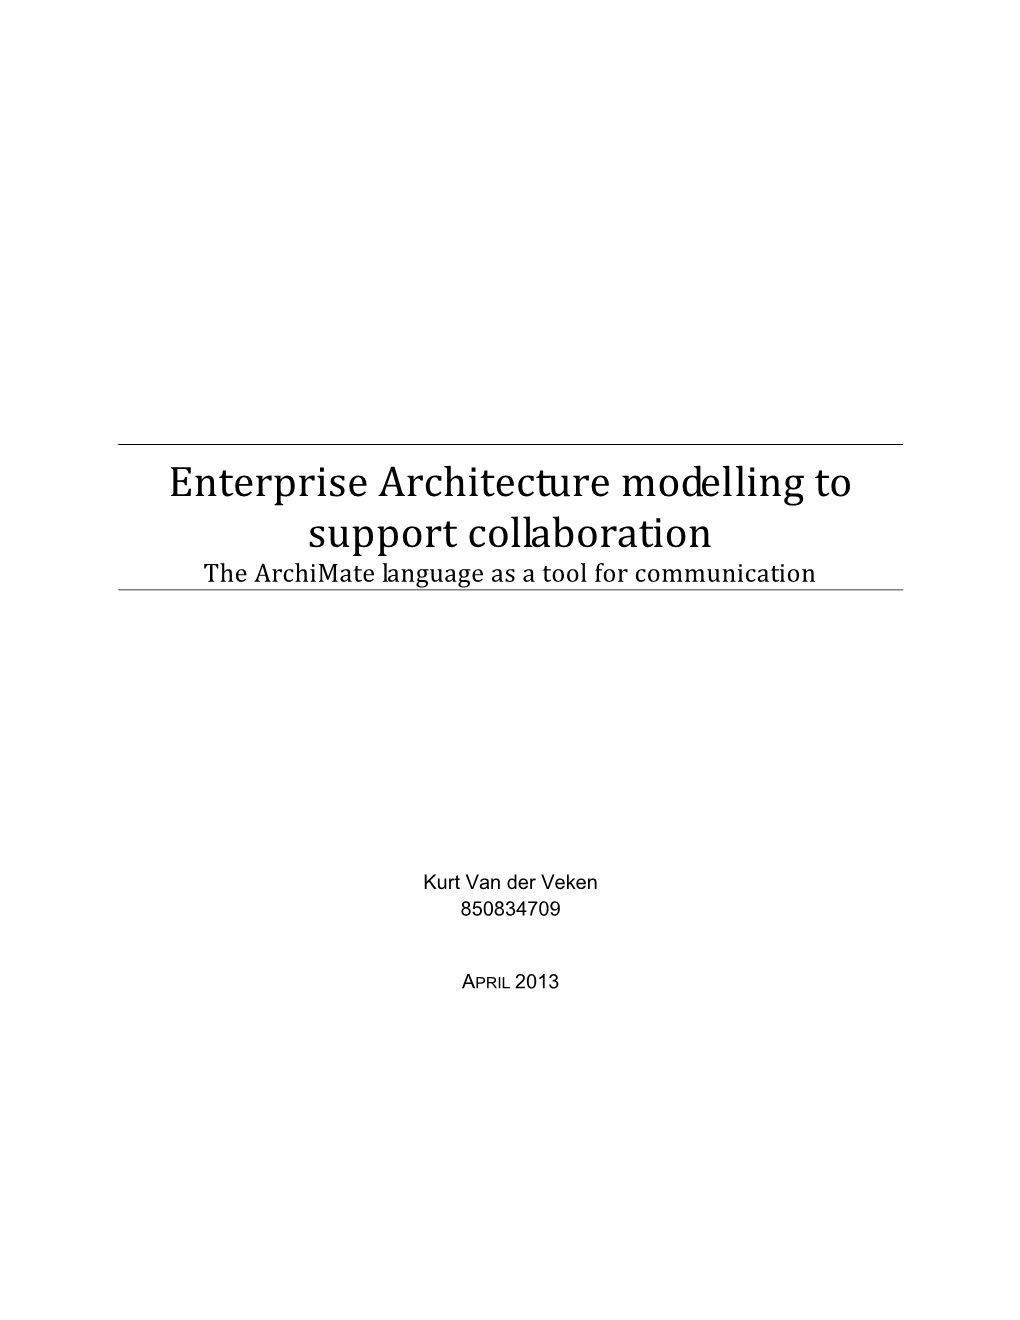 Enterprise Architecture Modelling to Support Collaboration the Archimate Language As a Tool for Communication